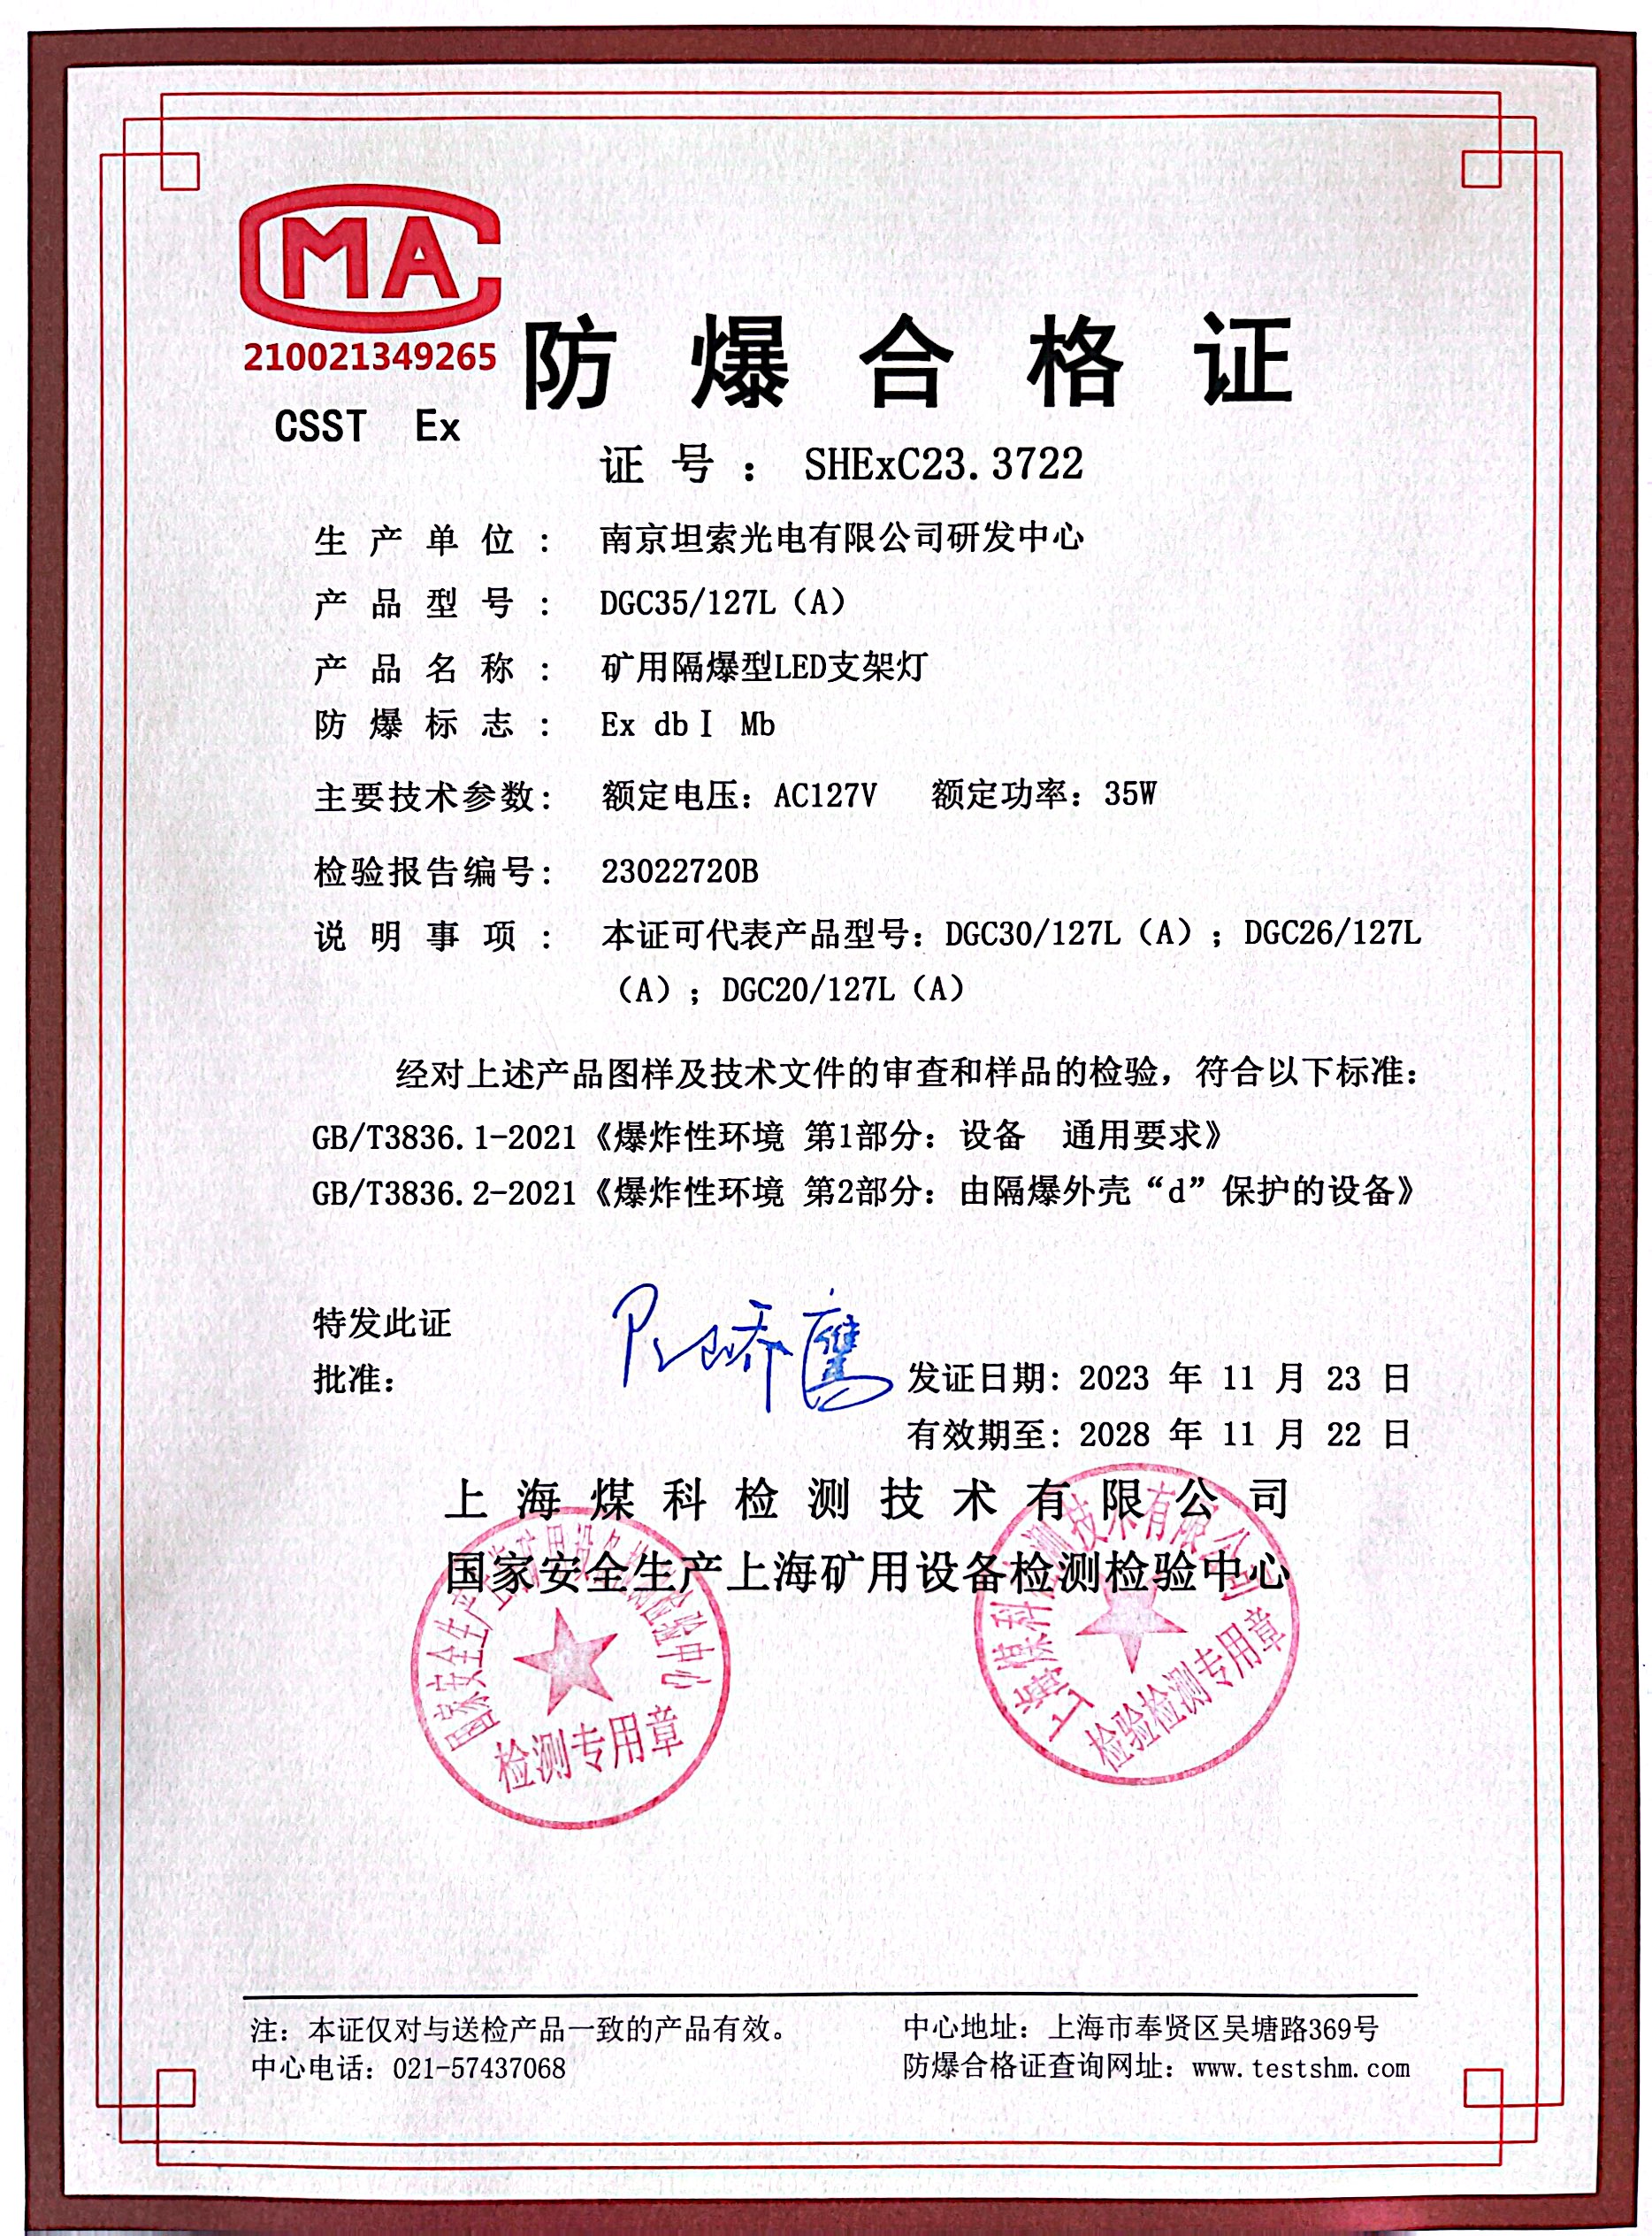 Warm congratulations to Tanso Optoelectronics for obtaining four product safety and explosion-proof certificates！